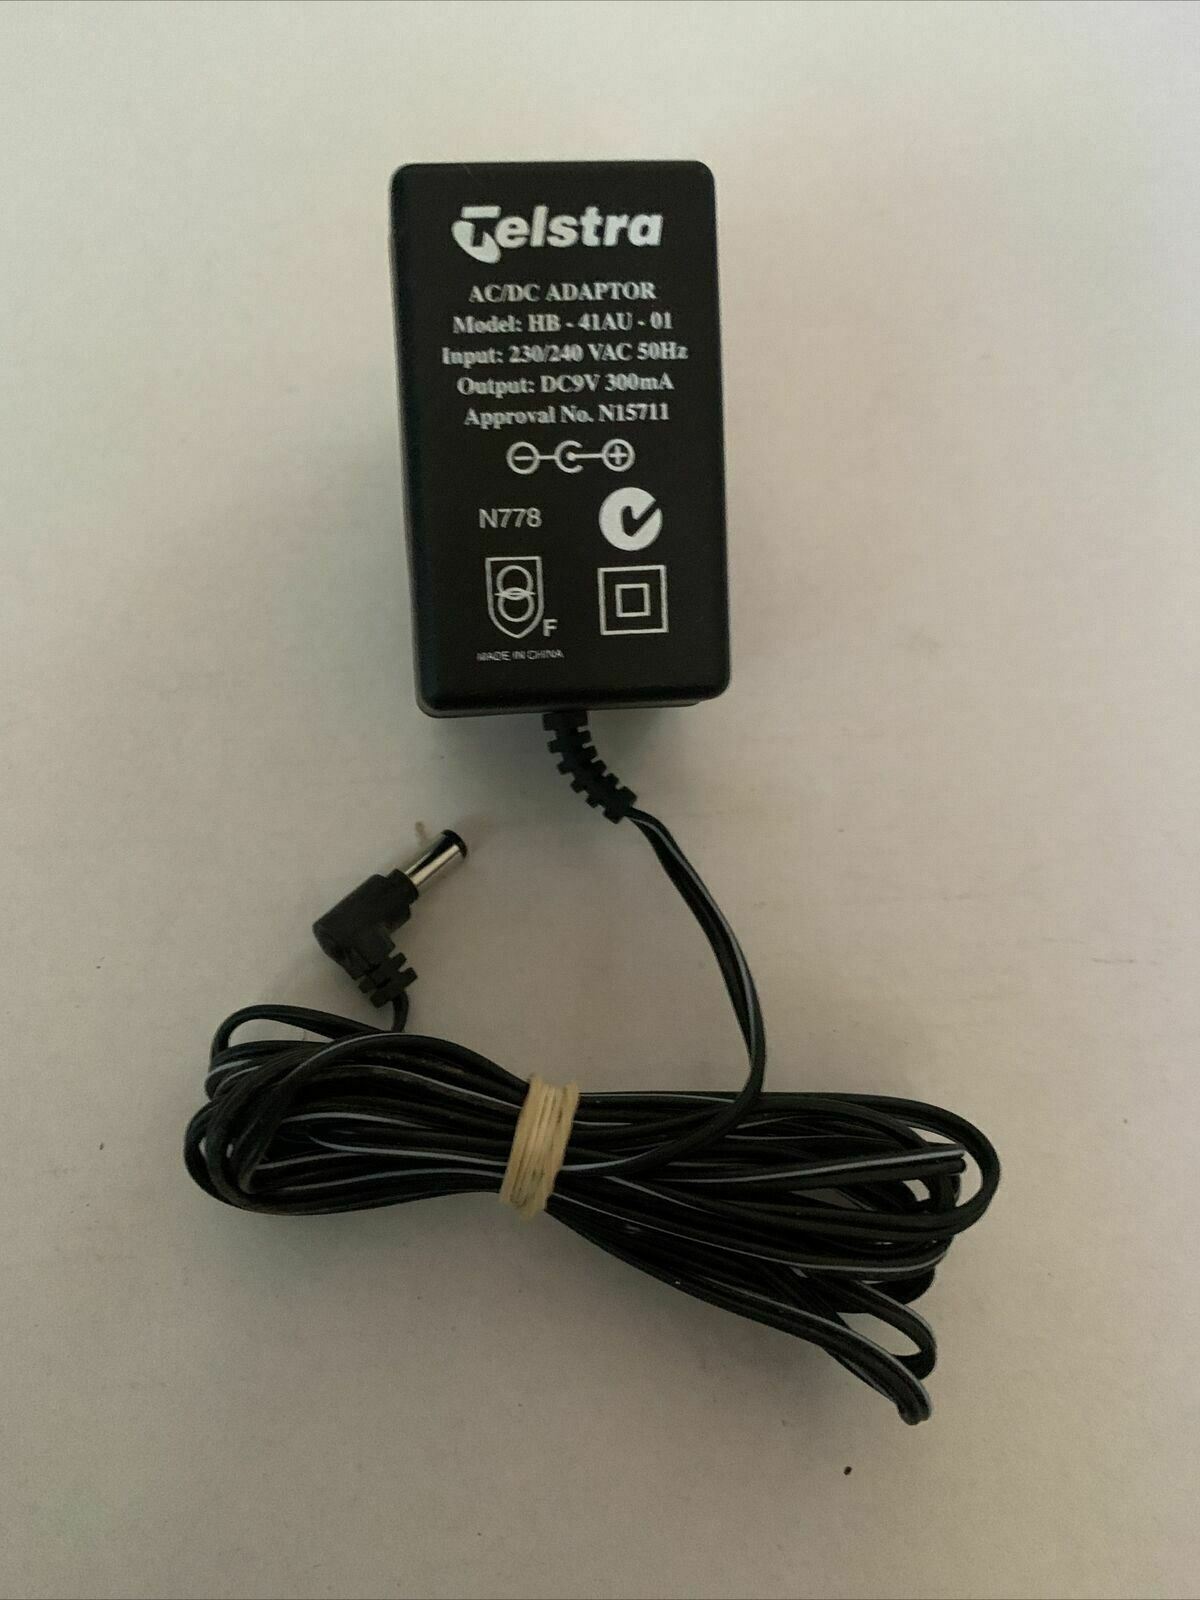 Genuine Telstra HB-41AU-01 AC Adaptor 9v 300mA Colour: Black Compatible Brand: For Telstra Type: AC/DC Adapter Fe